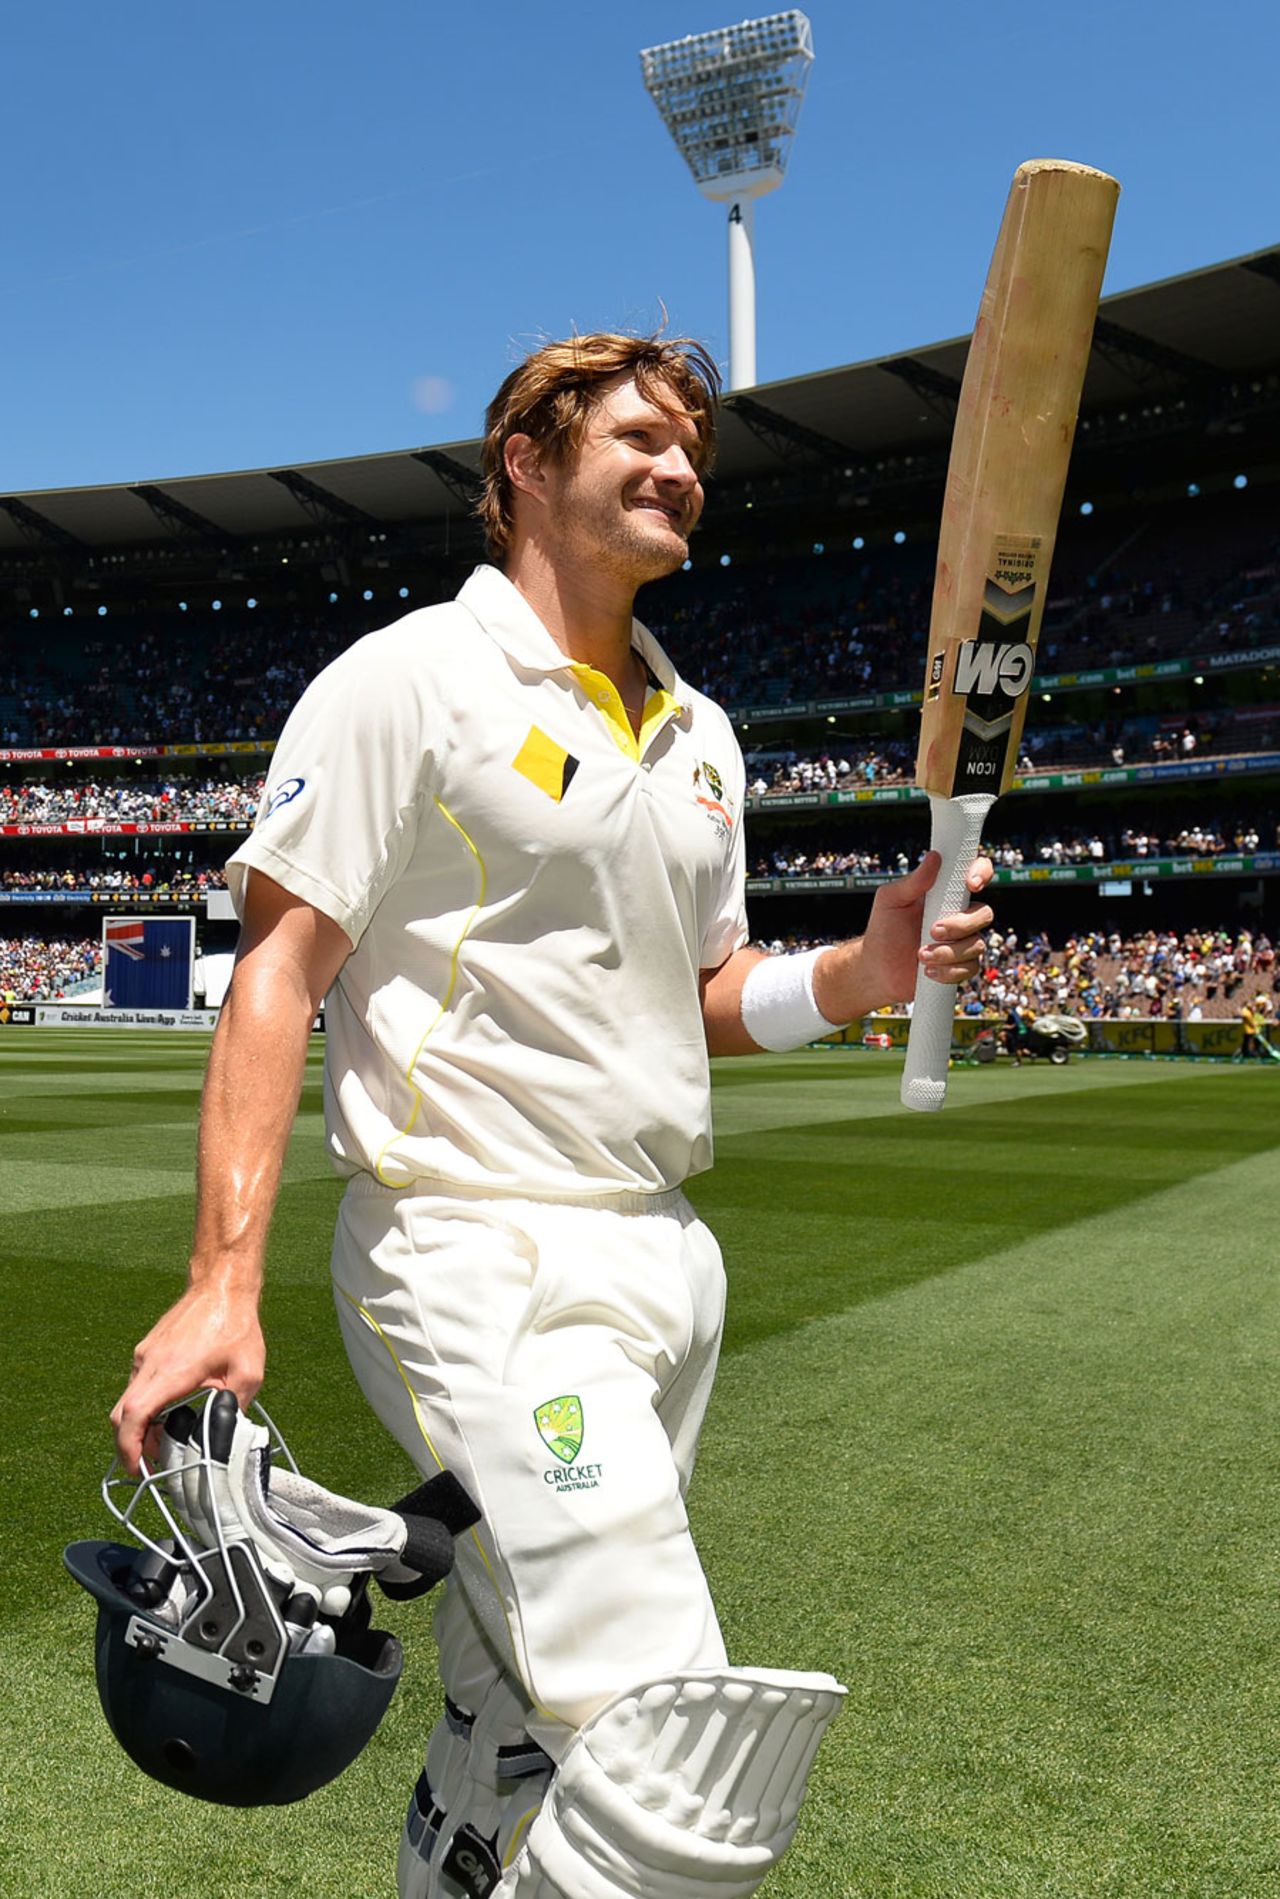 Shane Watson made an unbeaten 83 to see Australia home, Australia v England, 4th Test, Melbourne, 4th day, December 29, 2013